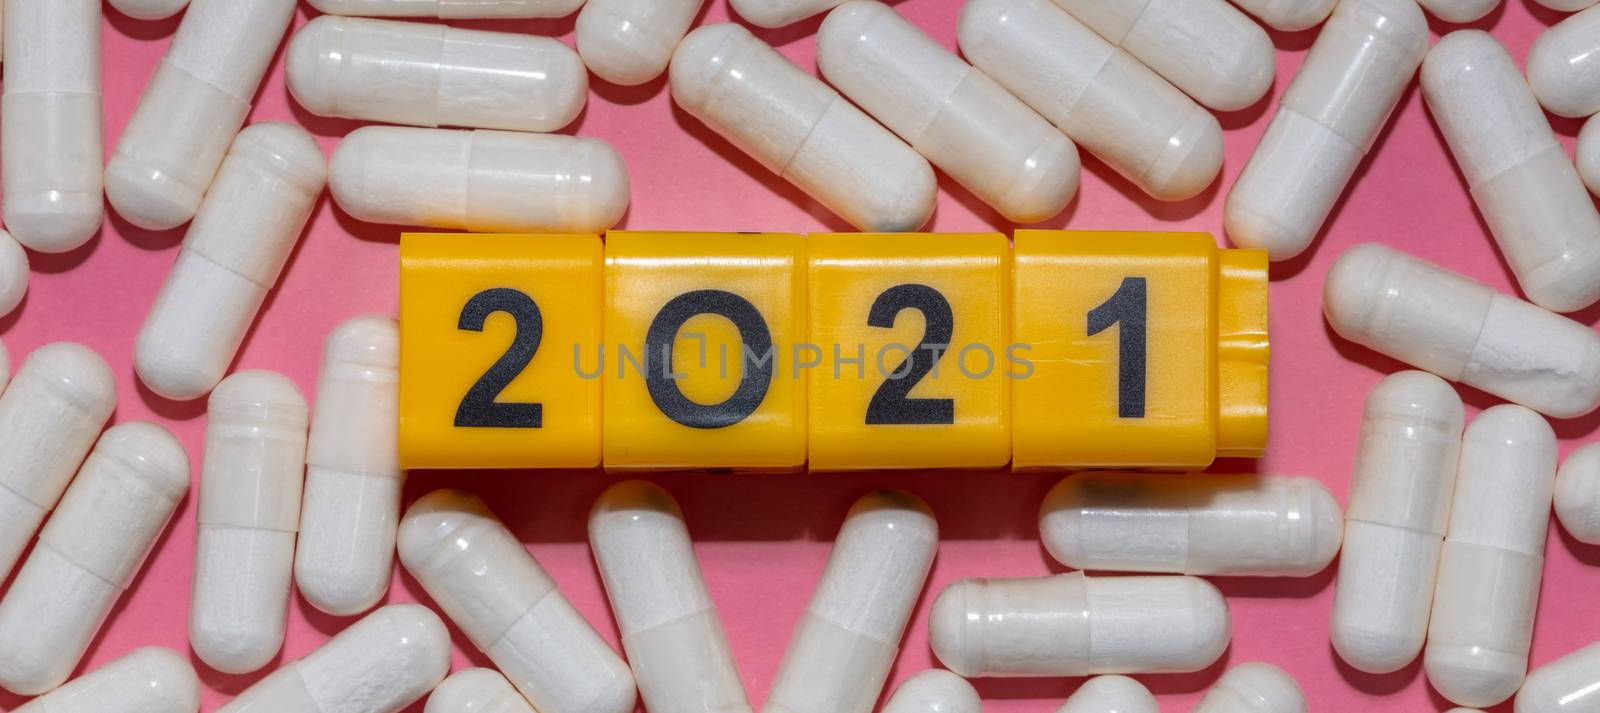 Top close up shot of white pills surrounding yellow cubes with black digits which form 2021 year. Pink background. Healthcare and pharmaceutical concept. New normal and reality concept. Banner size.